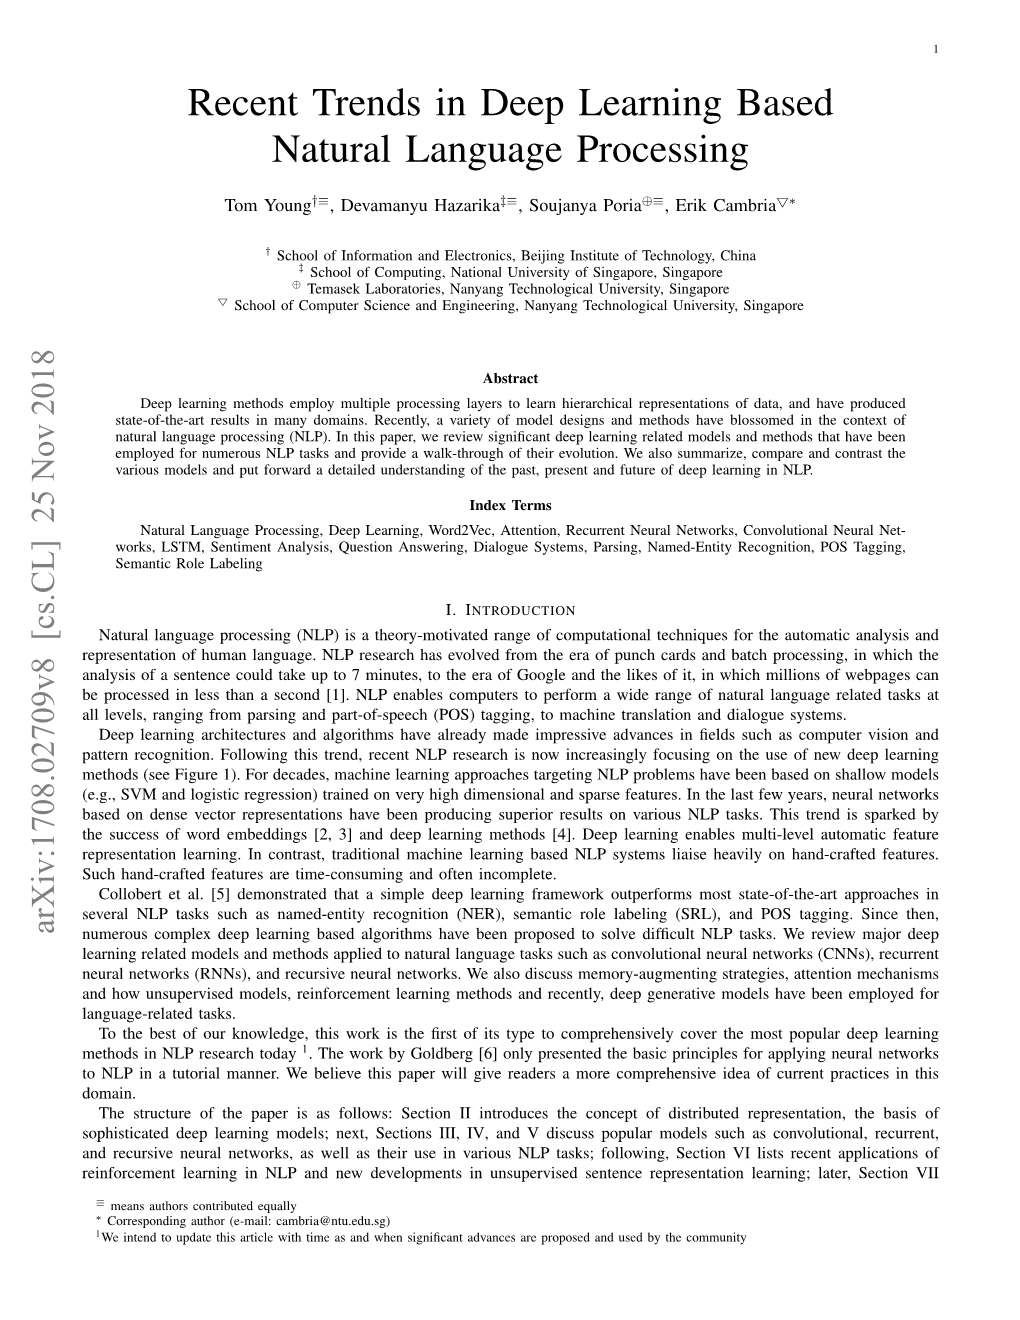 Recent Trends in Deep Learning Based Natural Language Processing